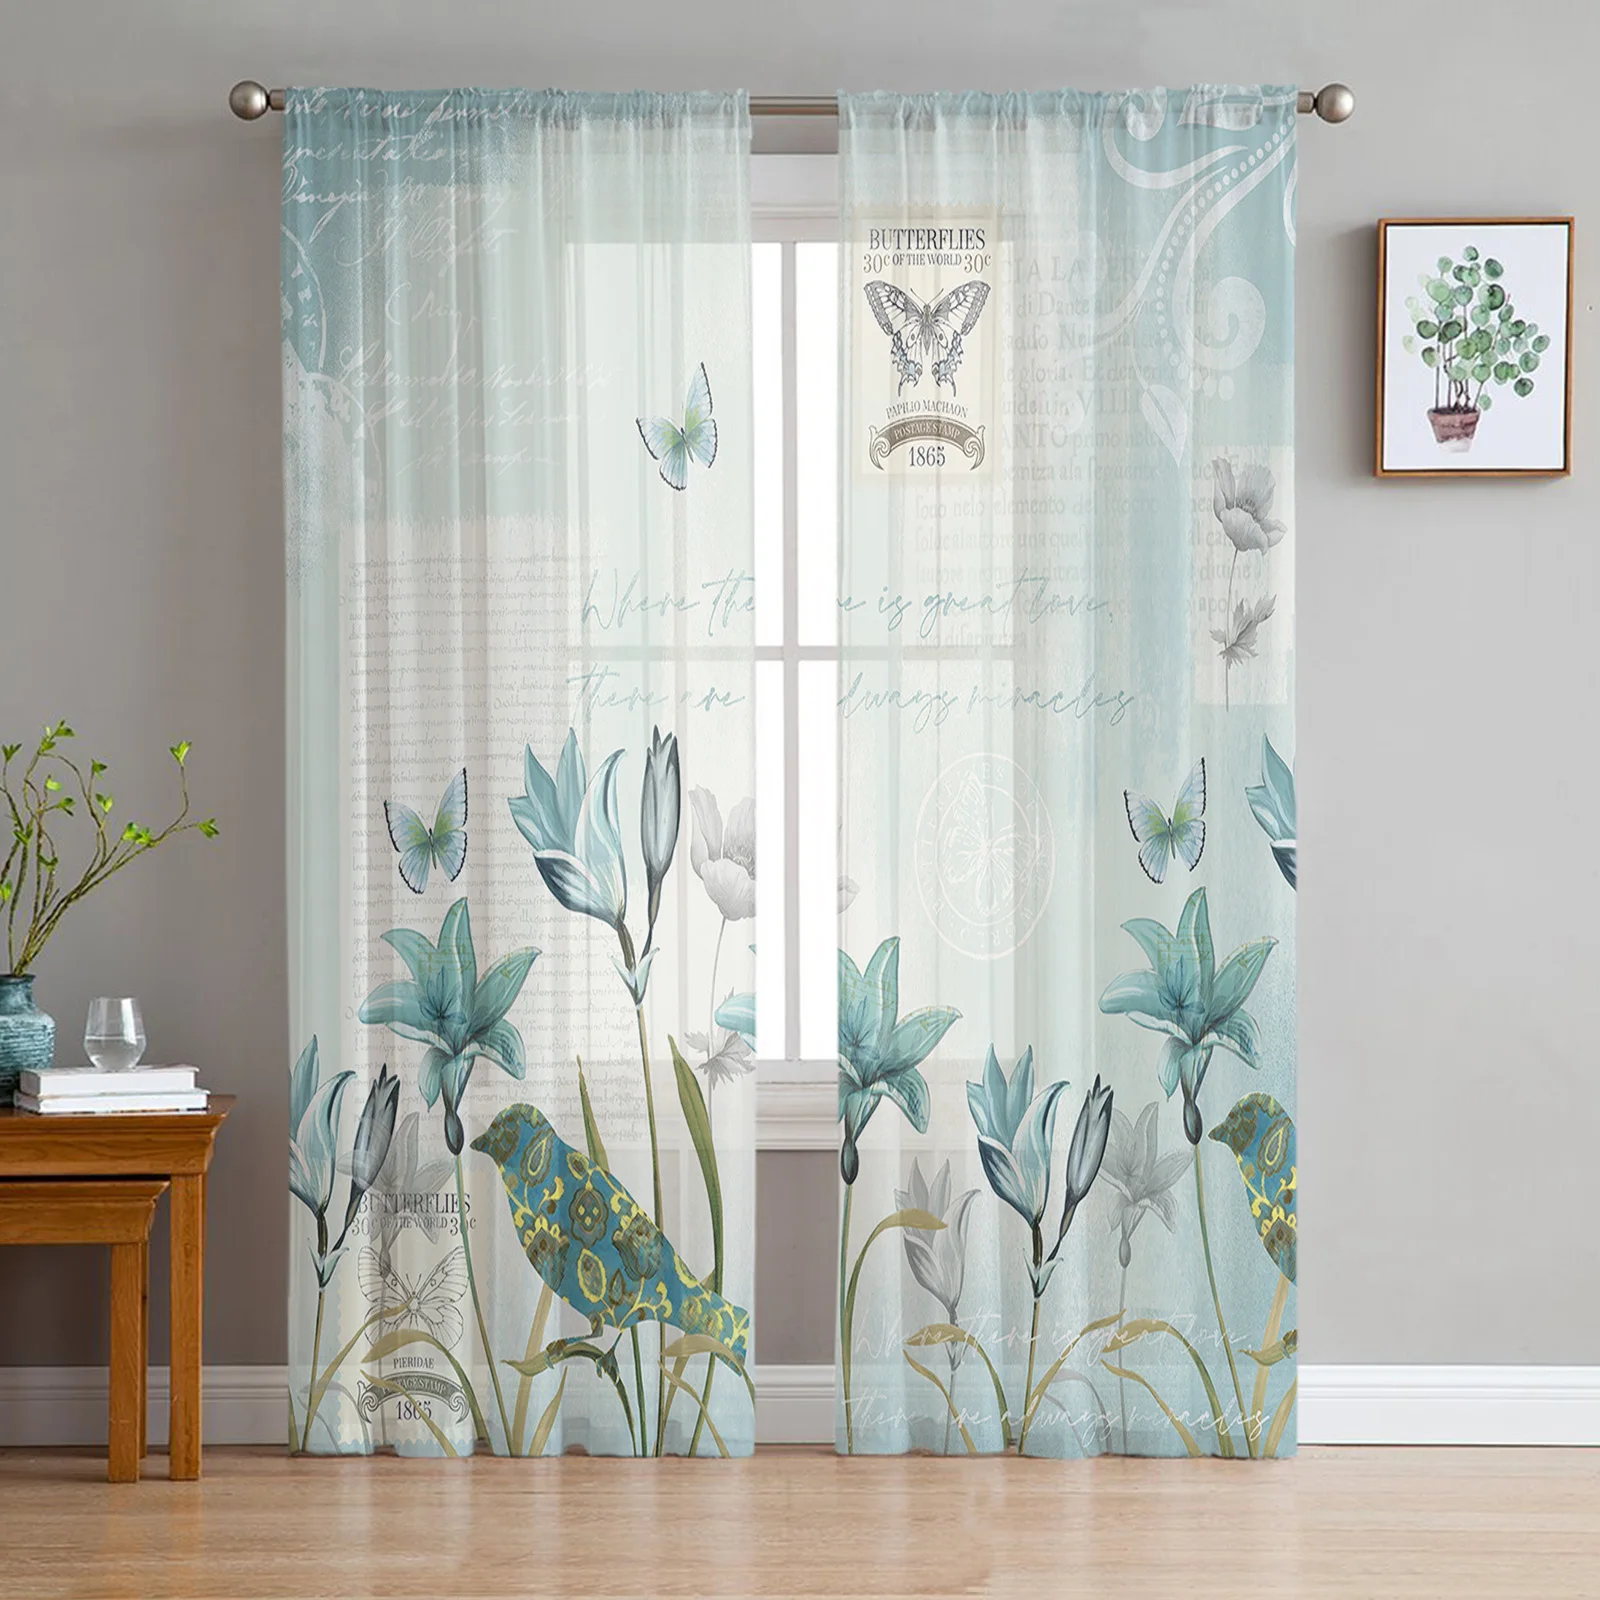 

Rustic Vintage Tulip Flower Bird Sheer Curtains for Living Room Decoration Window Curtain Kitchen Tulle Voile Organza Drapes